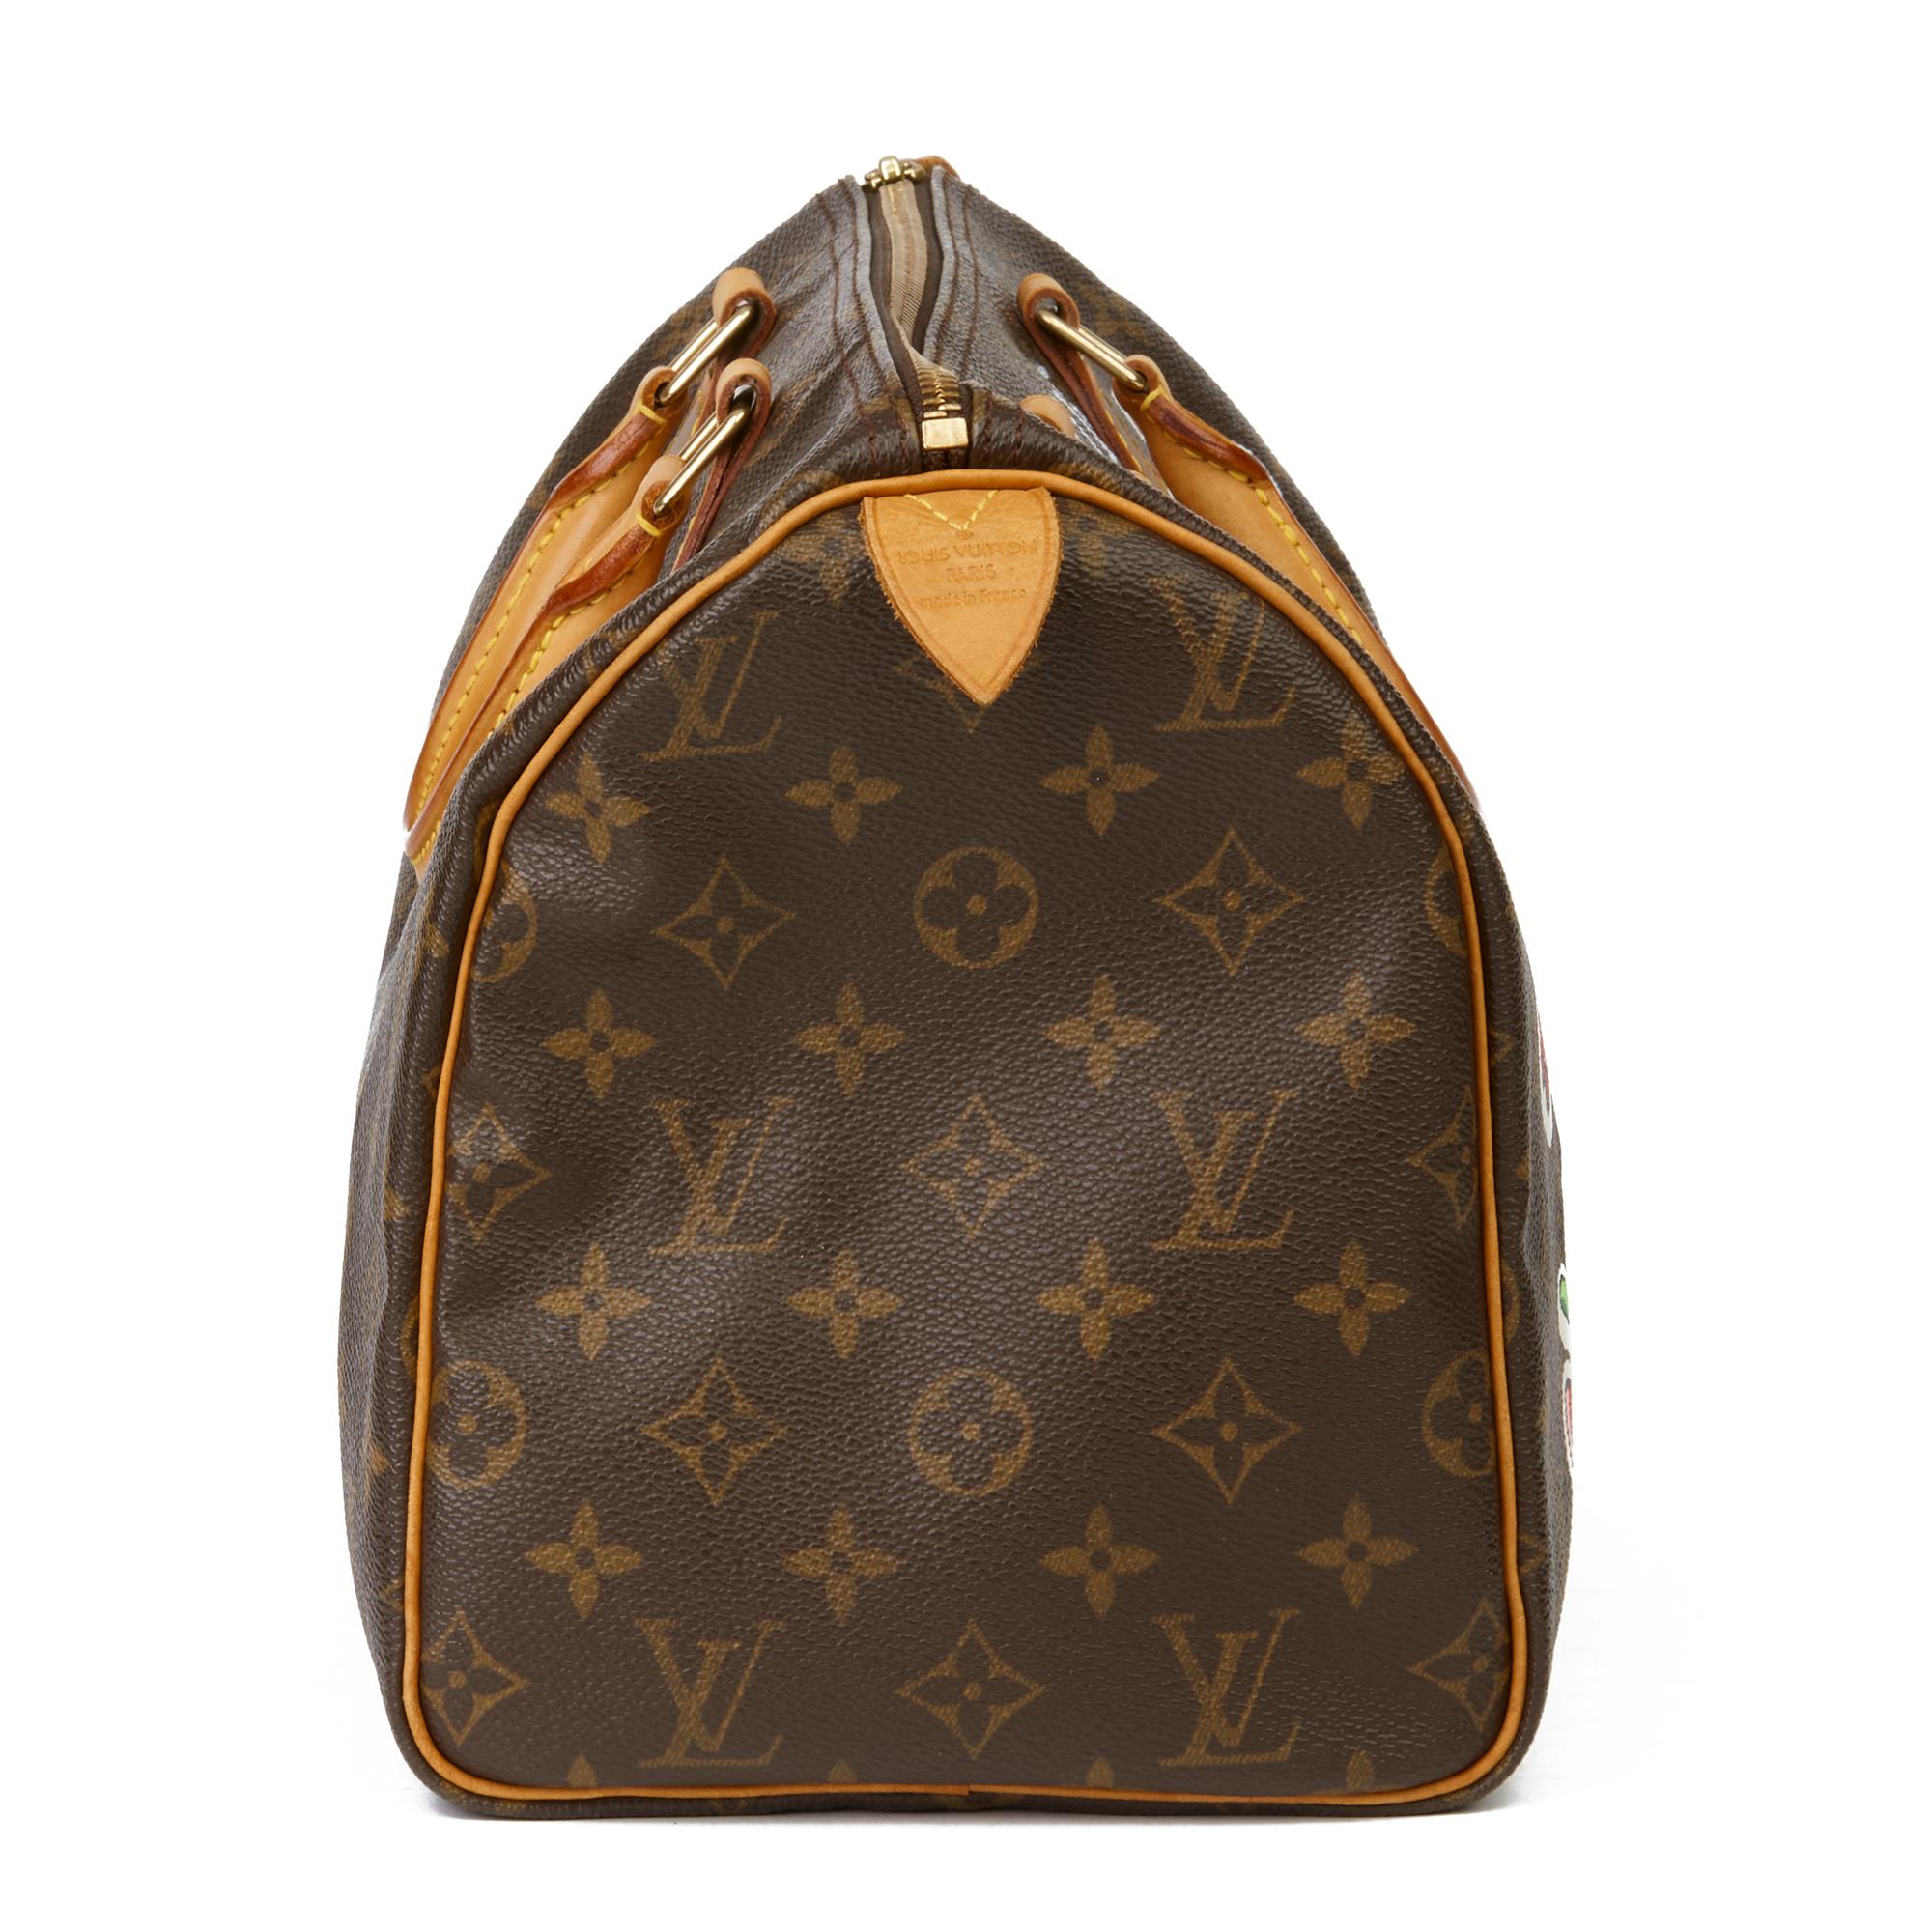 LOUIS VUITTON
X Year Zero London Hand-painted  ‘Cherries’ Brown Monogram Coated Canvas Speedy 30

Xupes Reference: HB3092
Serial Number: TH1001 
Age (Circa): 2001
Authenticity Details: Date Stamp (Made in France)
Gender: Ladies
Type: Tote

Colour: